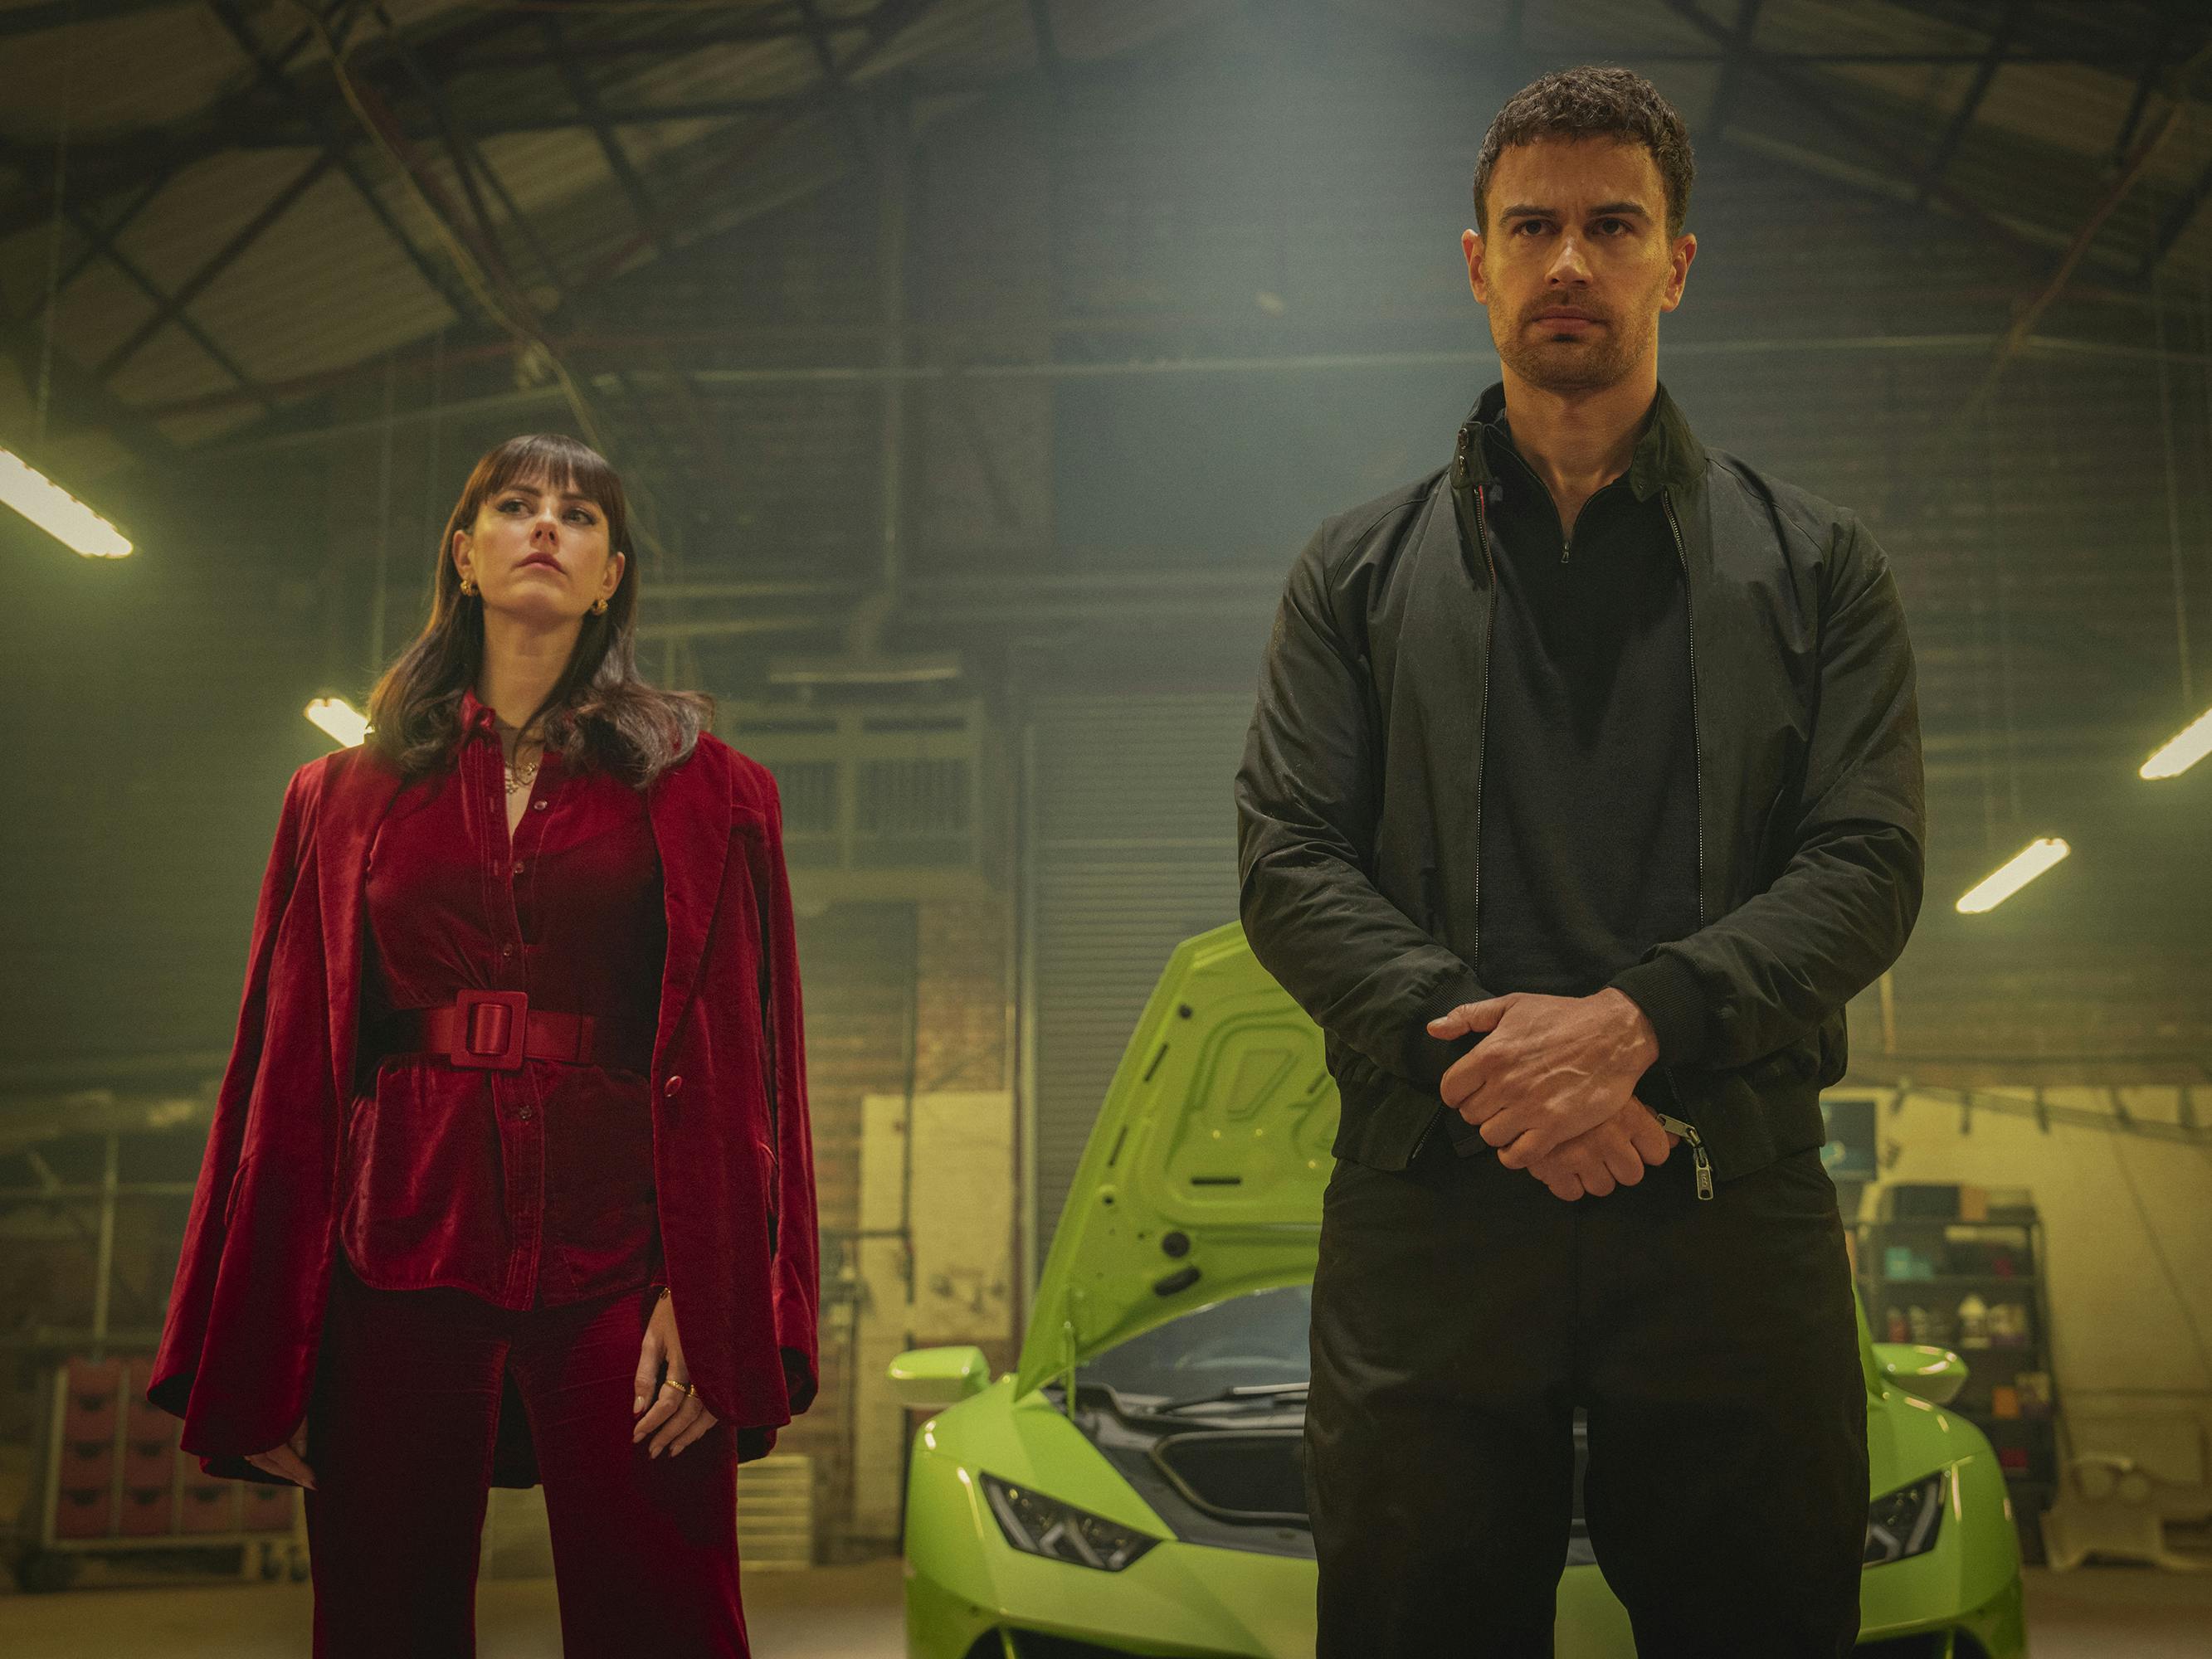 Susie Glass (Kaya Scodelario) and Eddie Horniman (Theo James) stand together in a warehouse. Behind them is a lime green car.